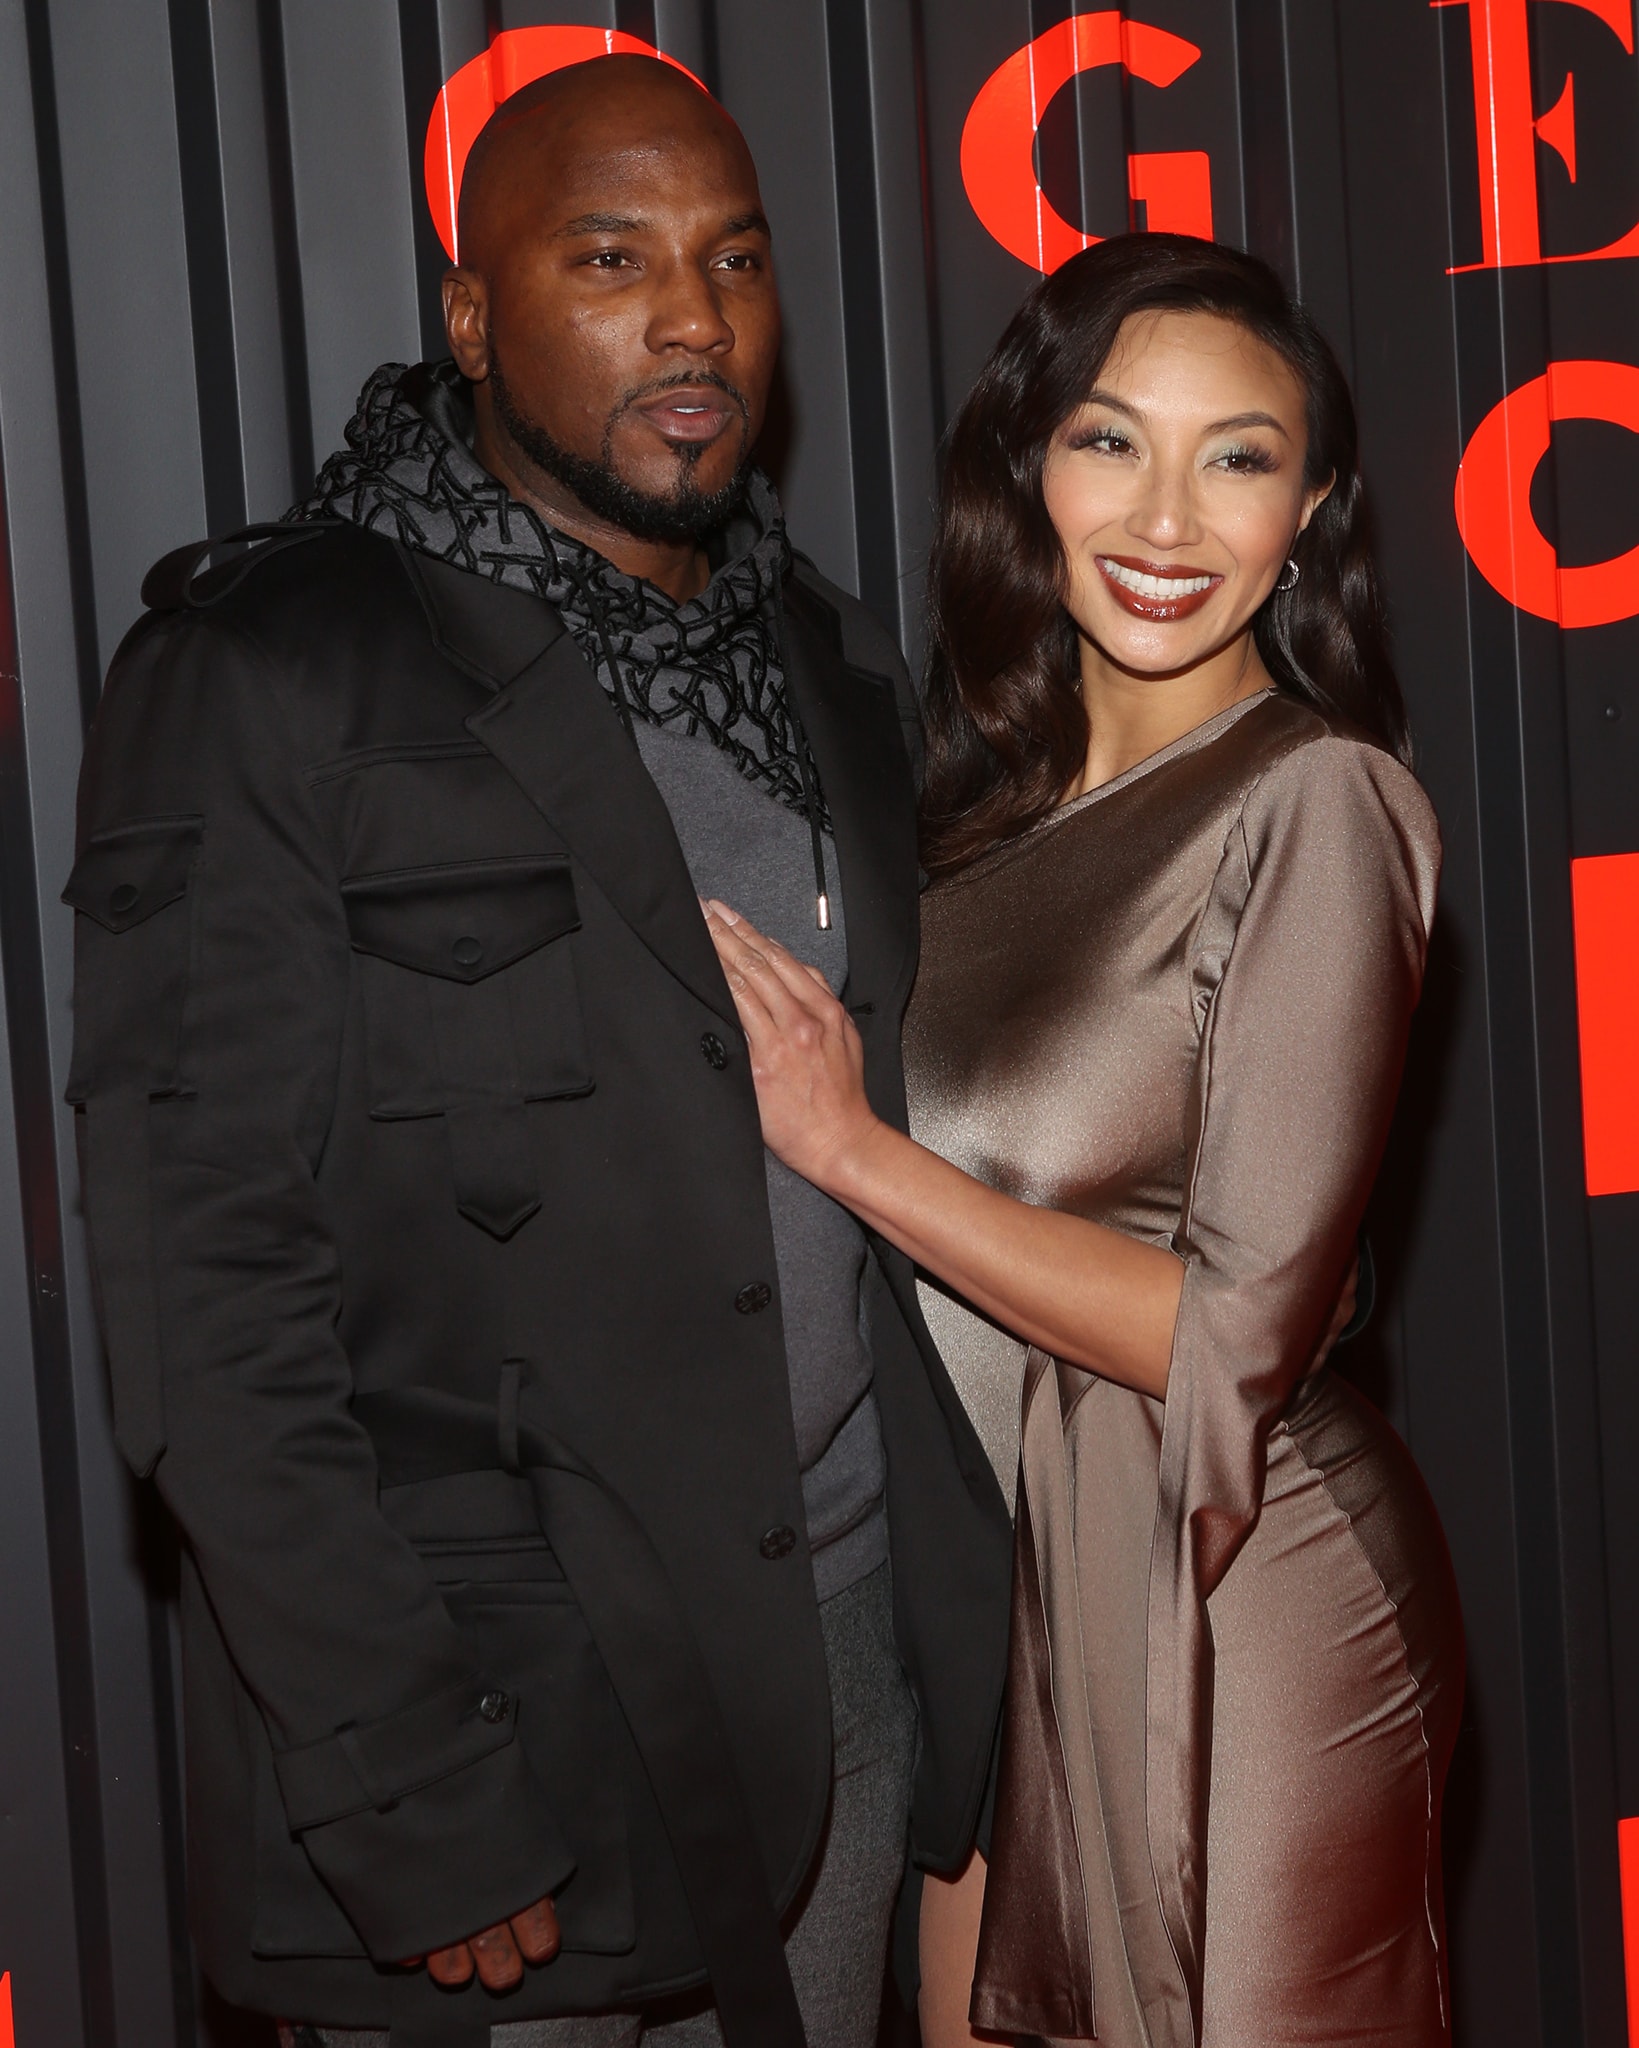 Jeezy and Jeannie Mai at the 2020 BVLGARI B.Zero1 Rock Party on February 6, 2020